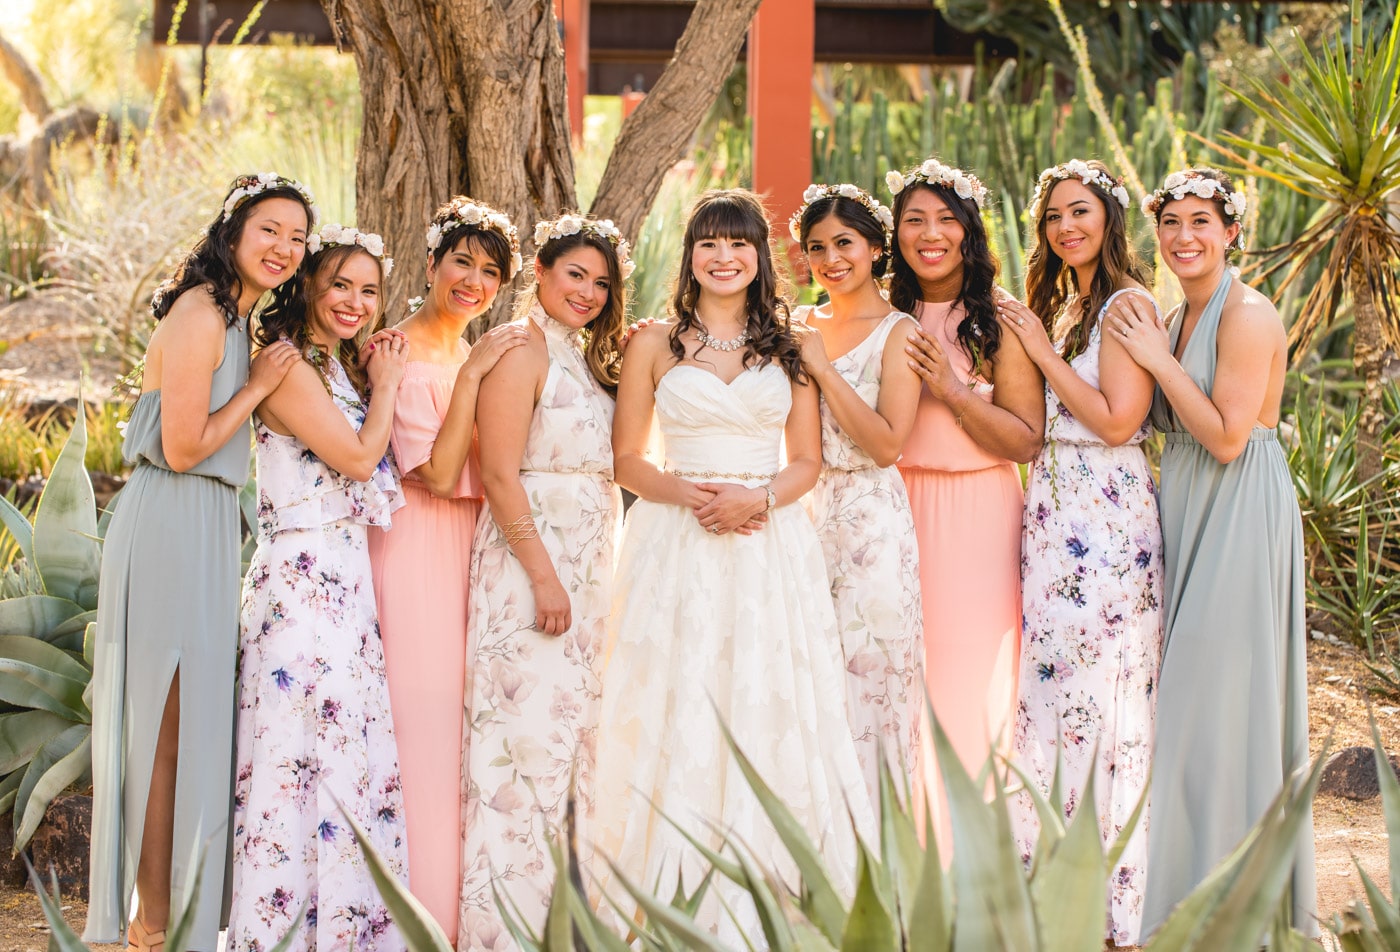 Bride and bridesmaids smiling outside